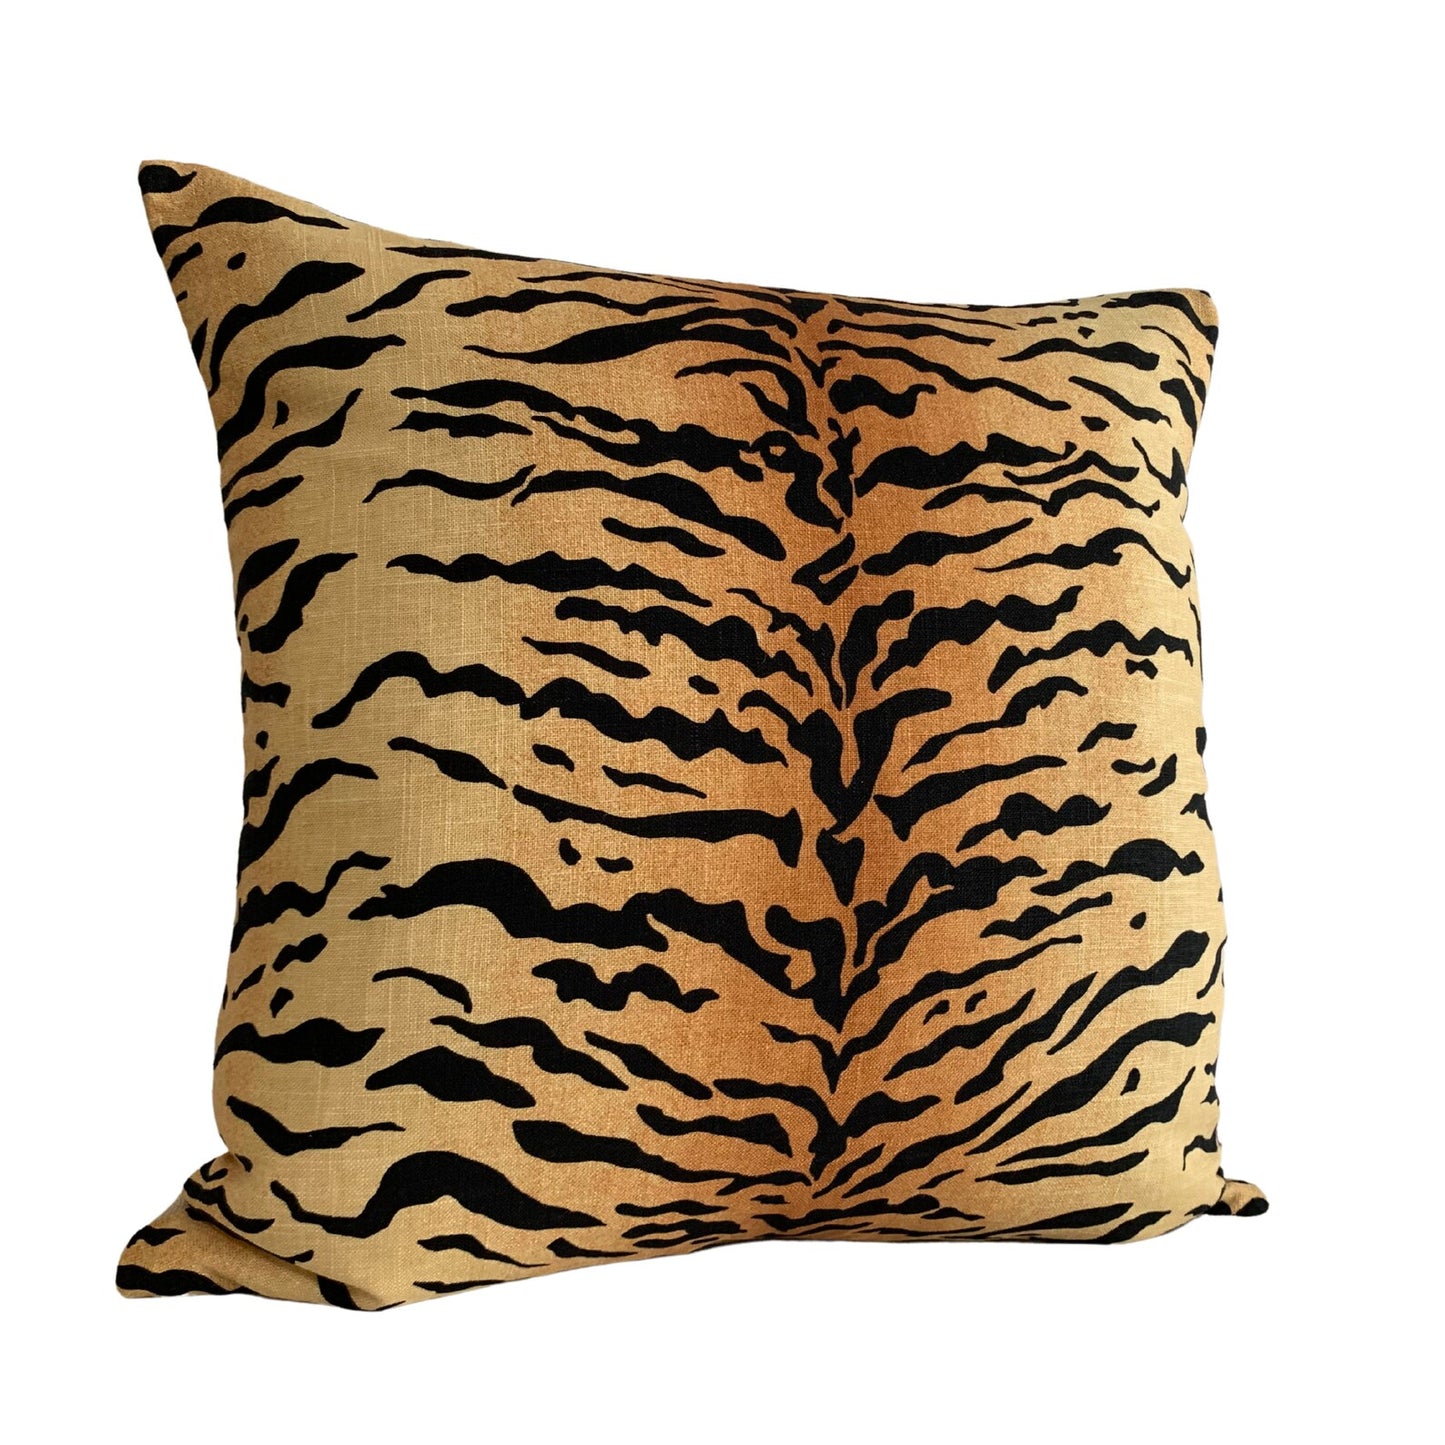 Vern Yip Amber Bengal Tiger Stripe Pillow Cover - Available in Bolster, Lumbar, Throw, Euro Sham Sizes